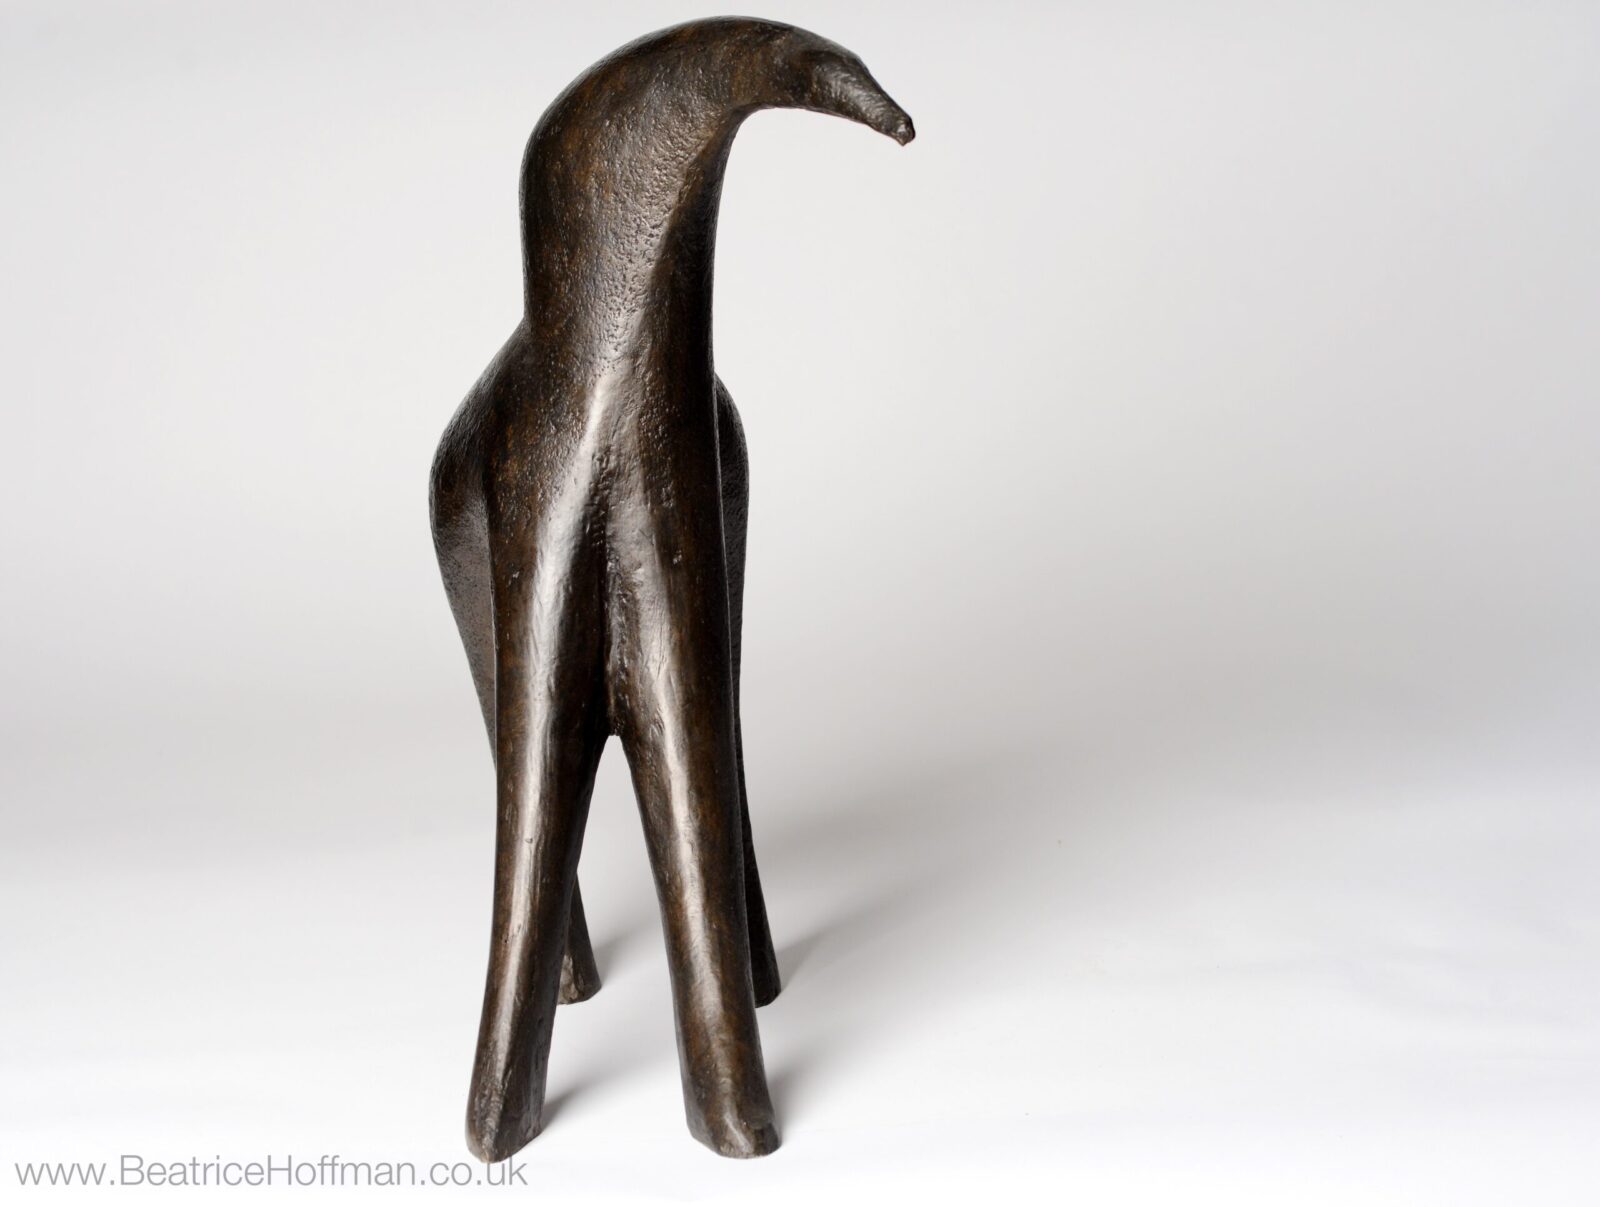 contemporary abstract domestic sculpture of an animal for interior design